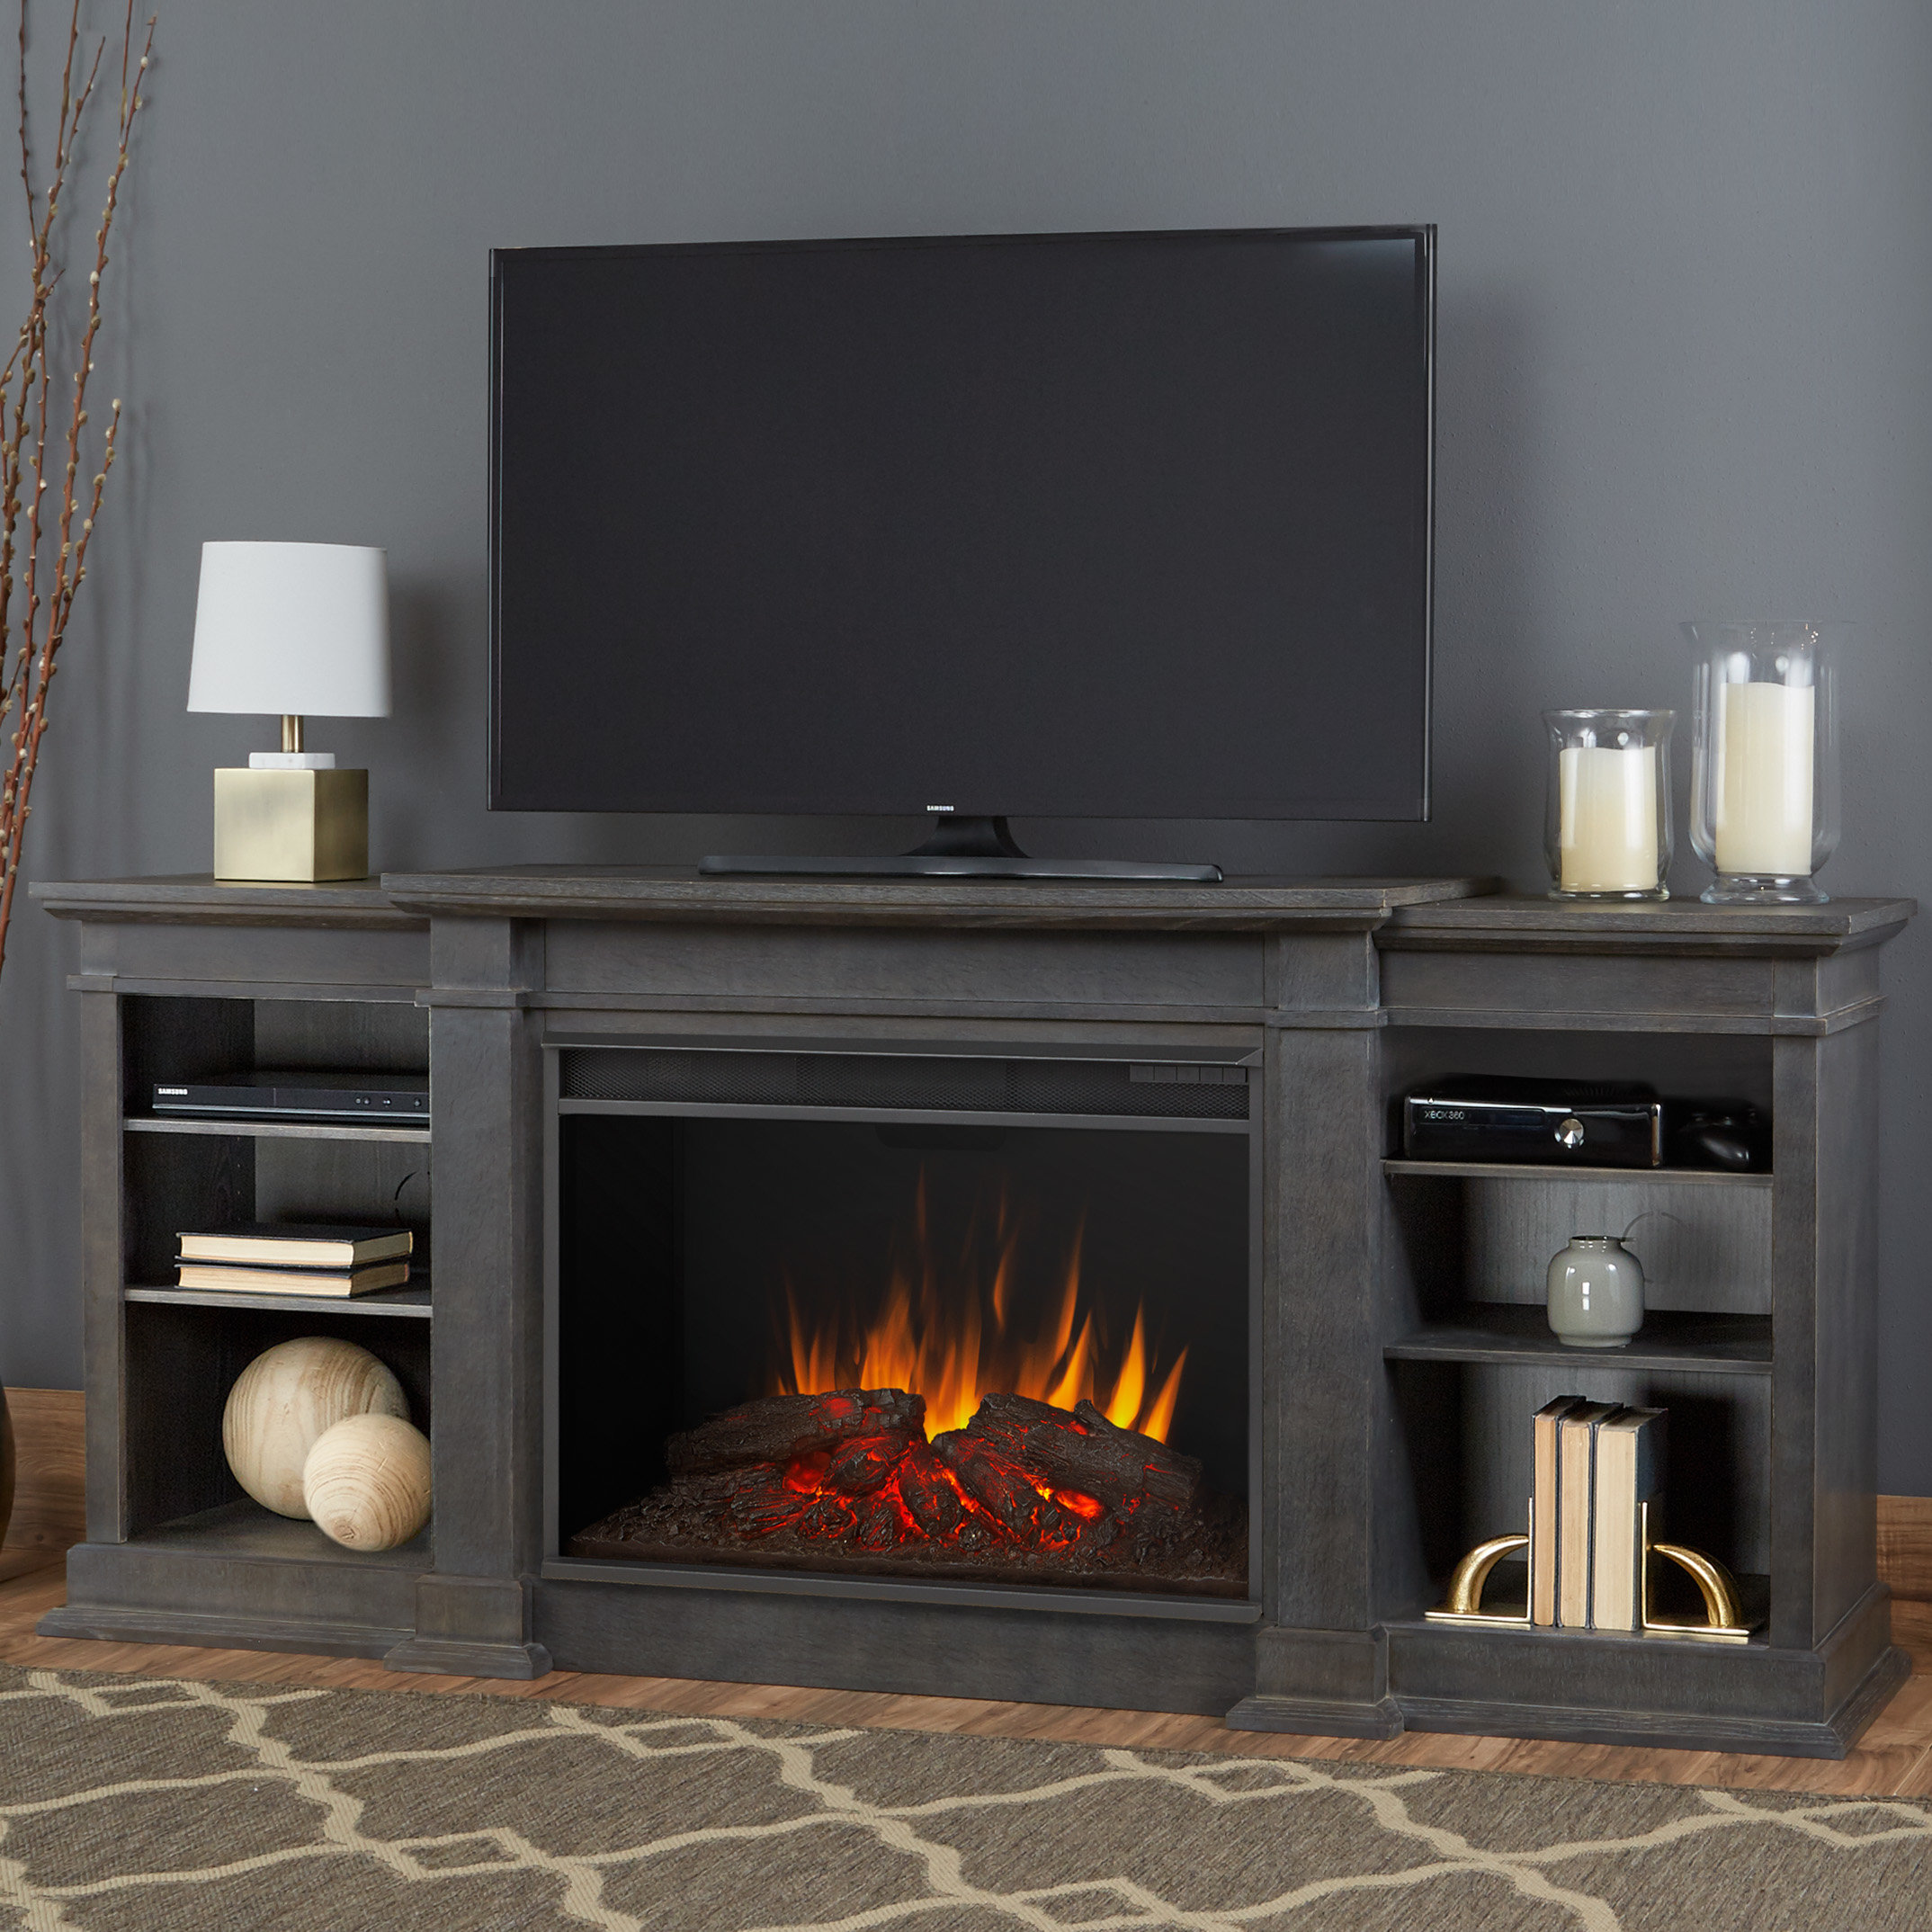 entertainment center with fireplace and speakers bluetooth